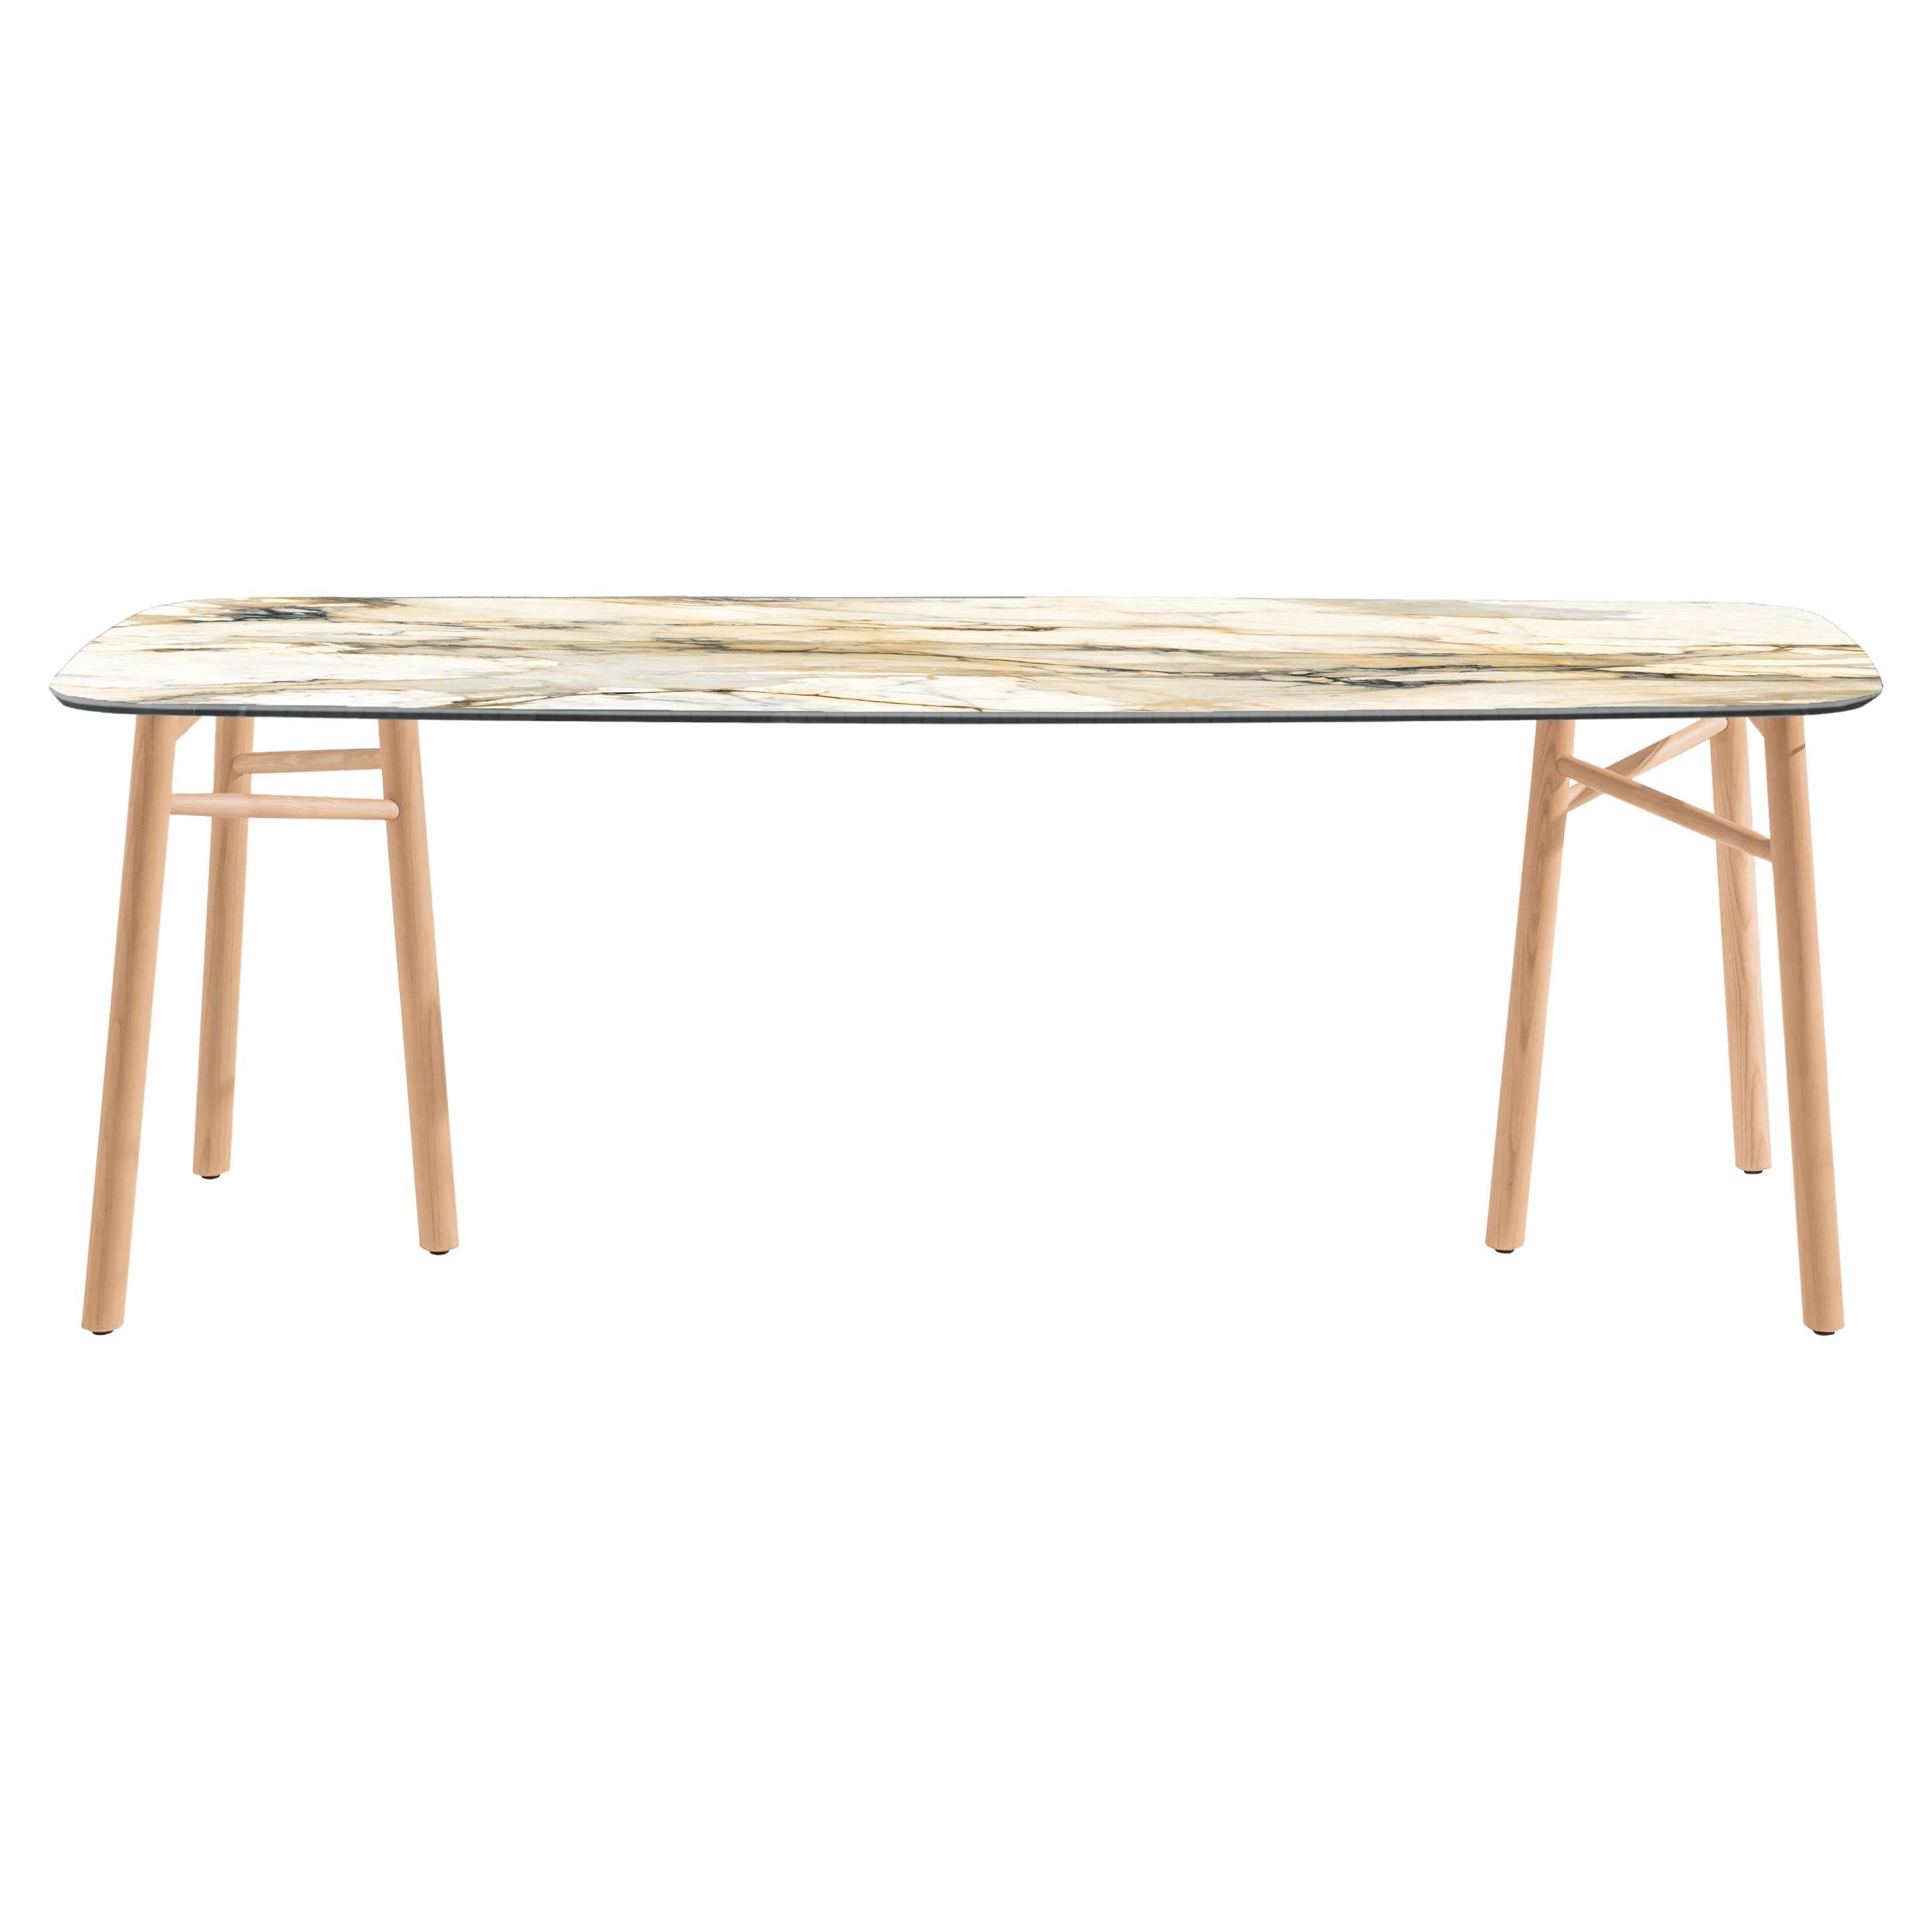 Sakti Dining Table, Natural Ash and Ceramic by Marialaura Rossiello Irvine For Sale